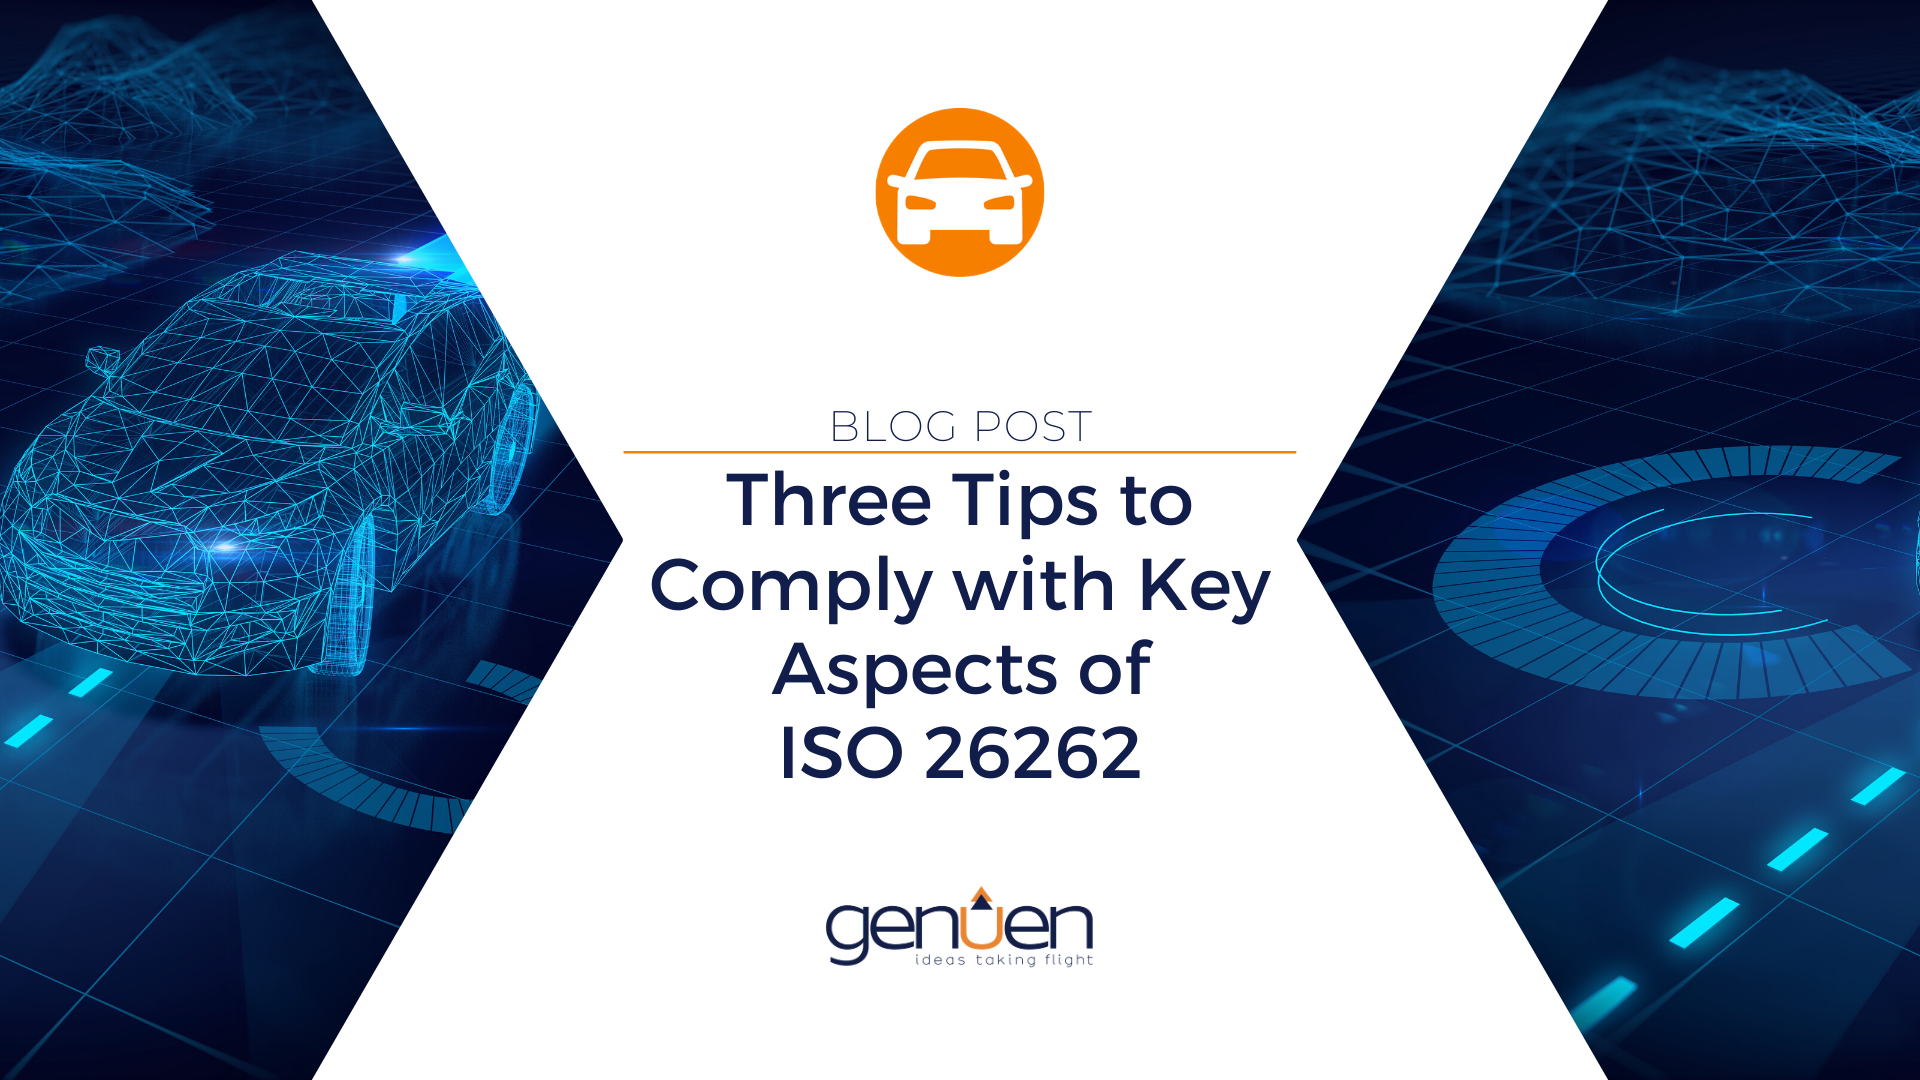 Three Tips to Comply with Key Aspects of ISO 26262